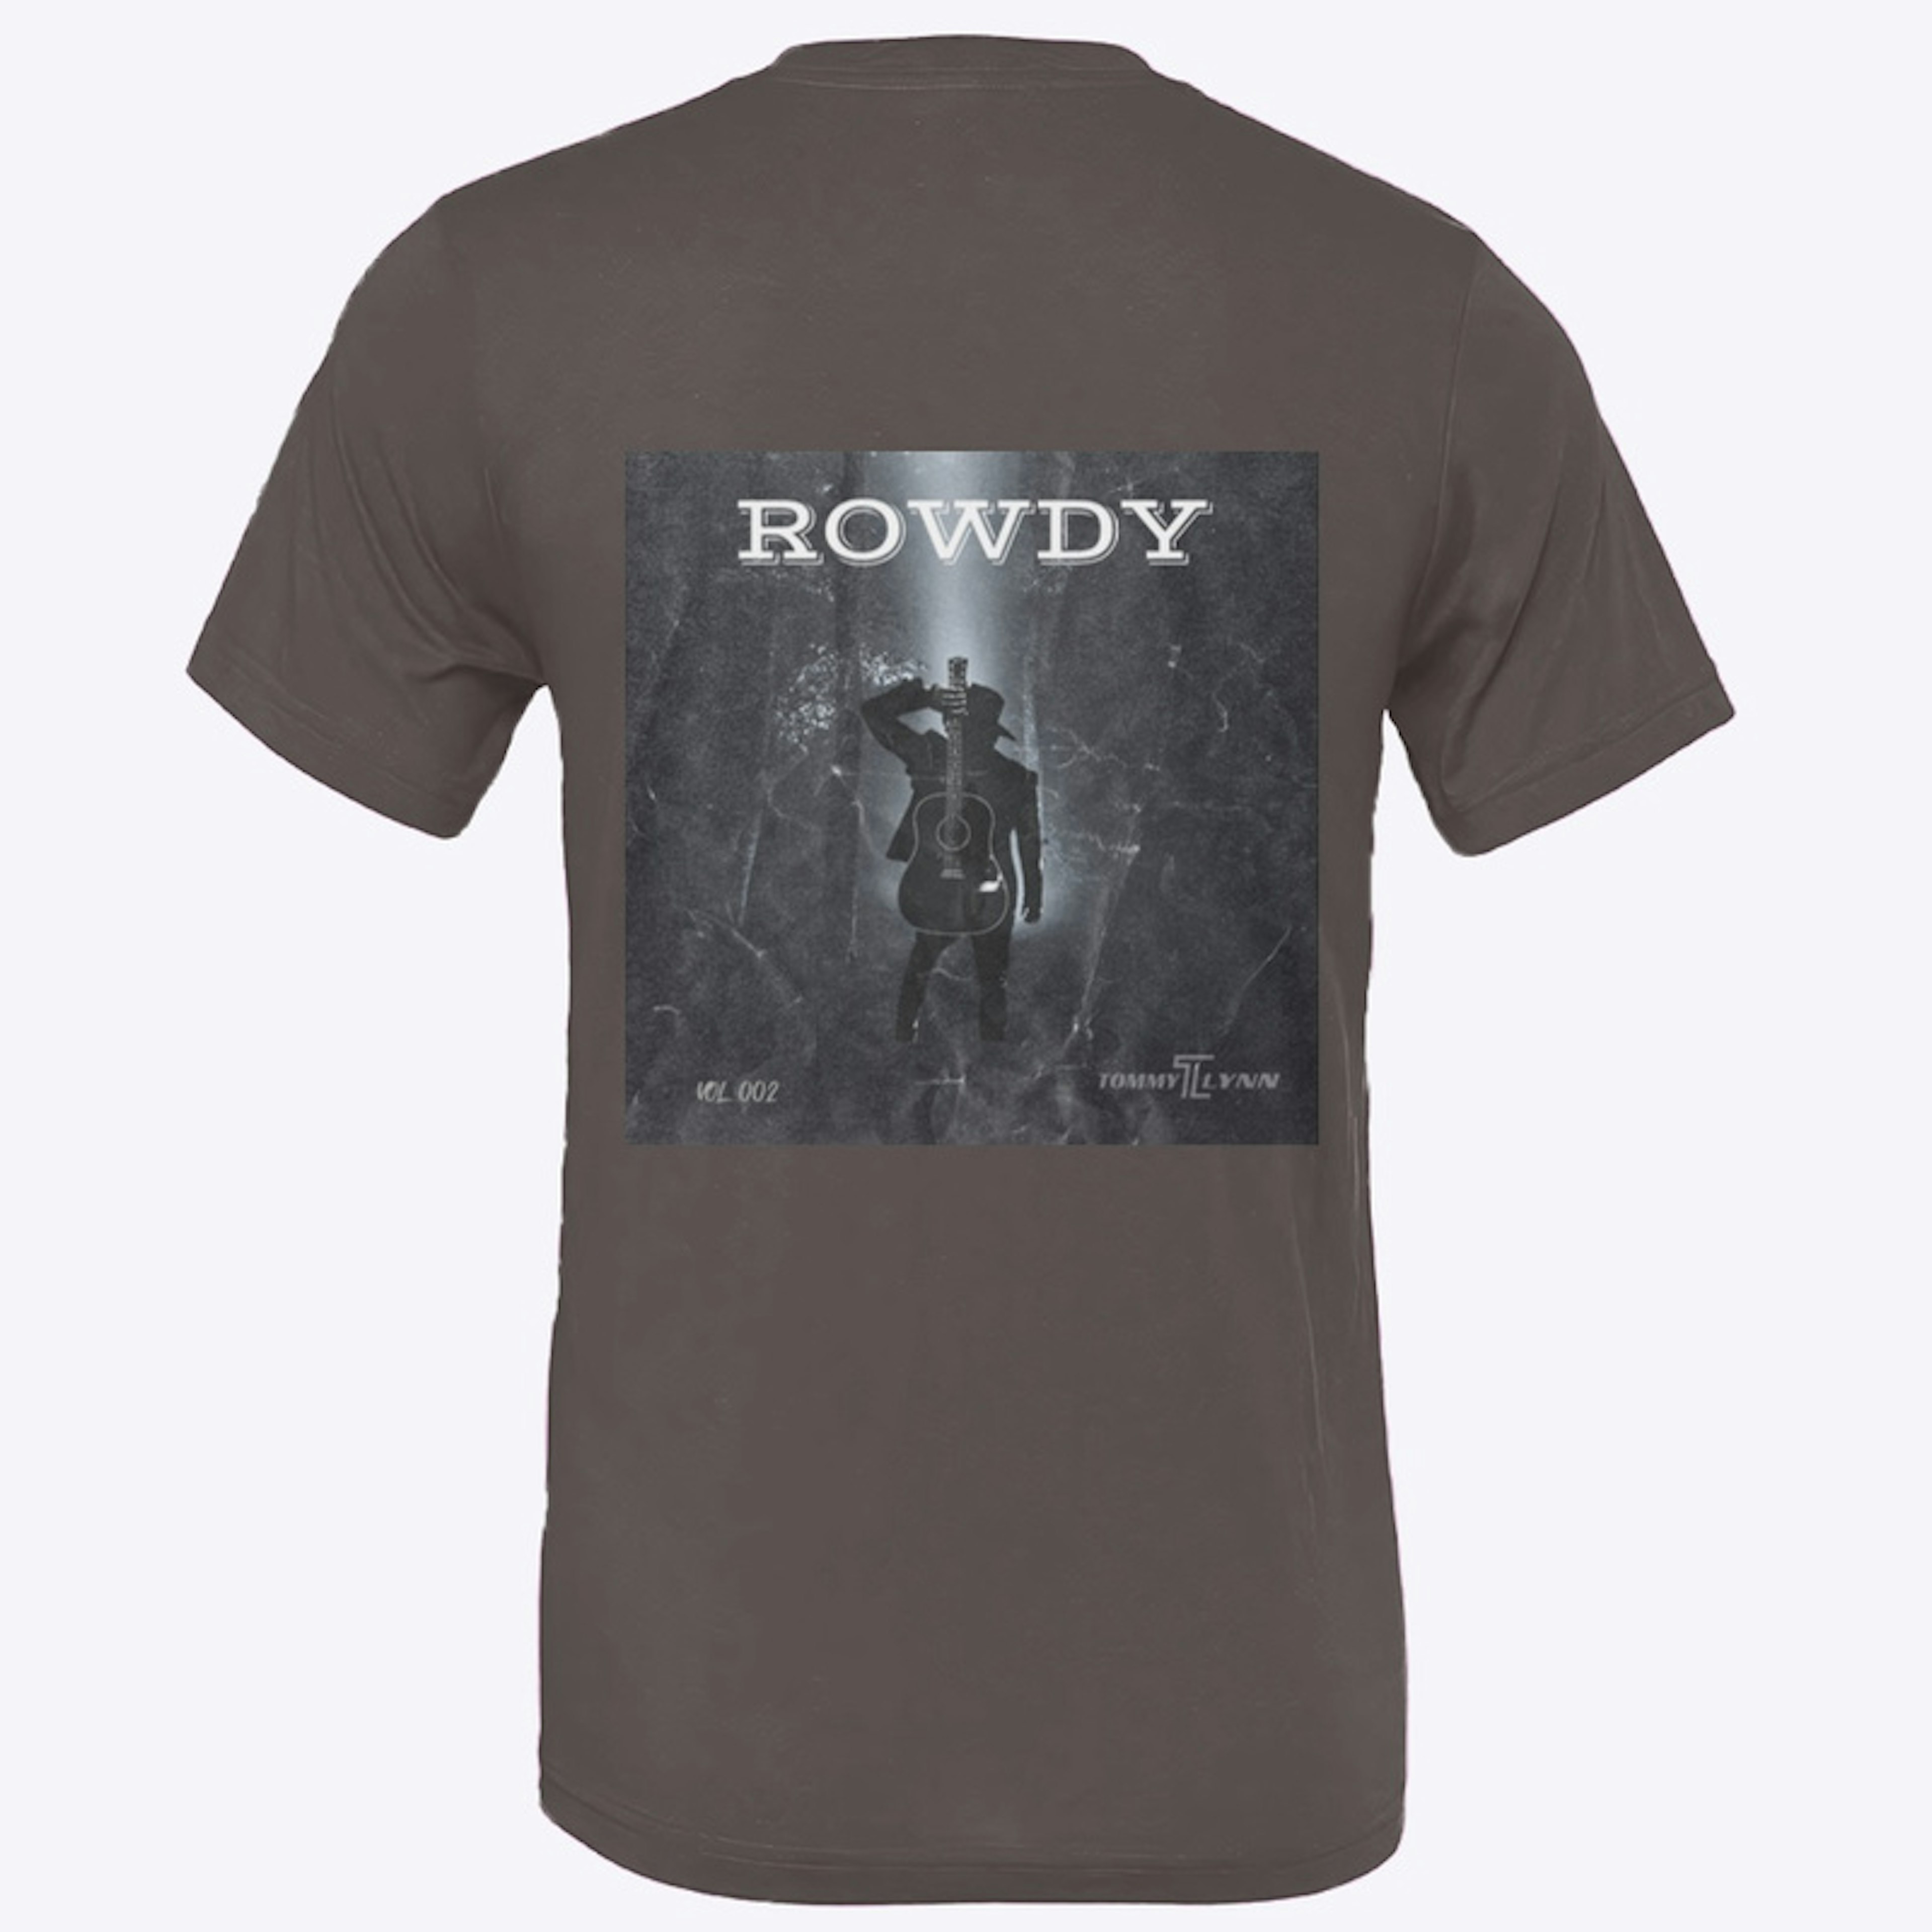 The Rowdy Collection